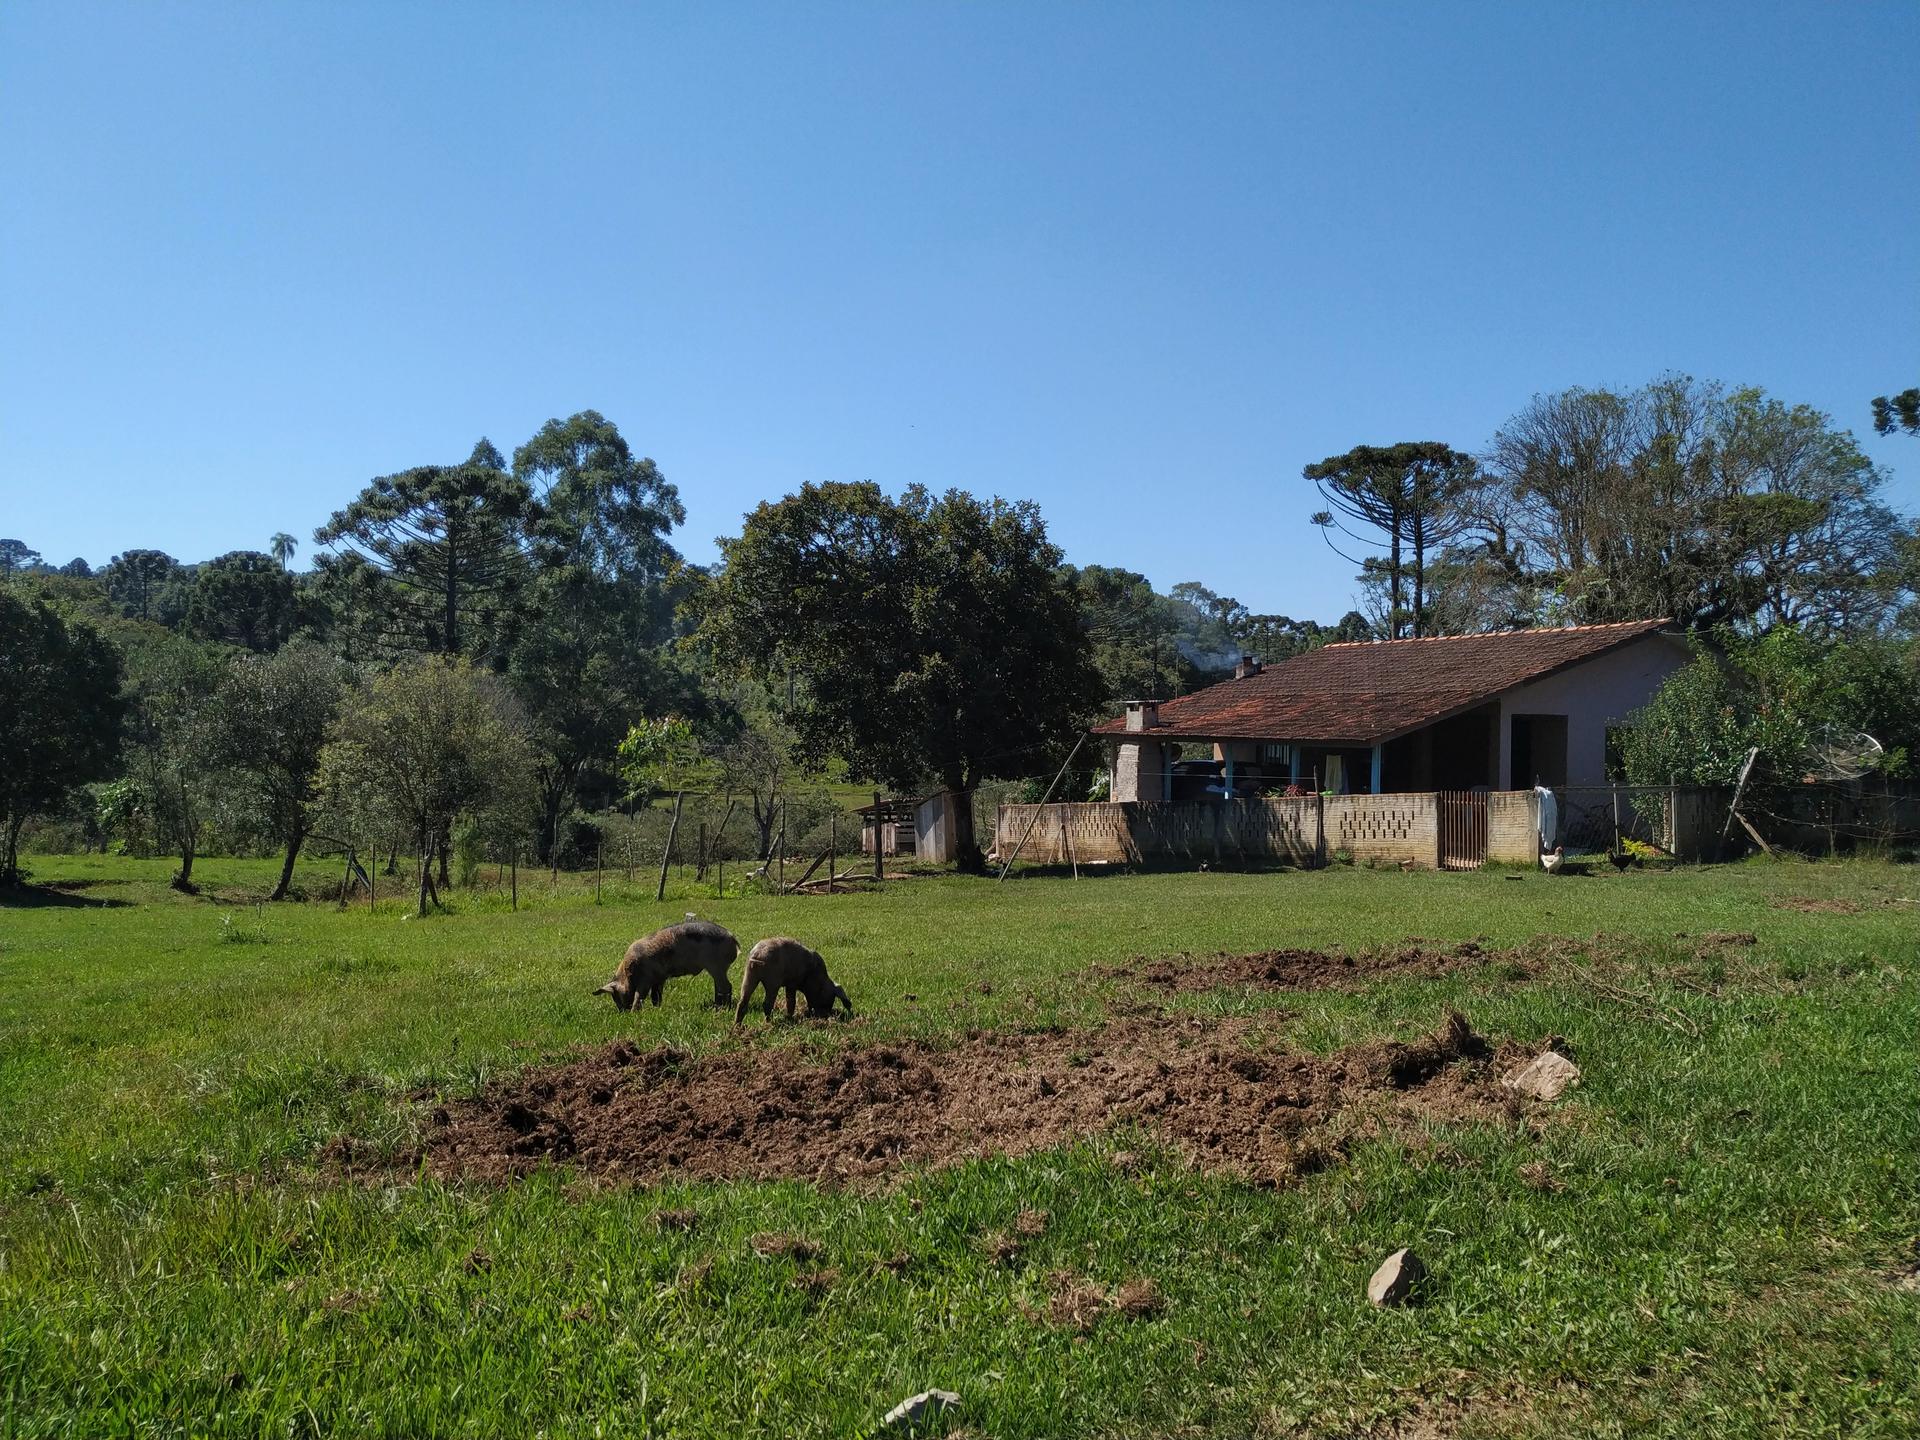 In this traditional faxinal community, Marcondes, in the countryside of the Brazilian state of Paraná, residents let their farm animals roam free on their communal lands.